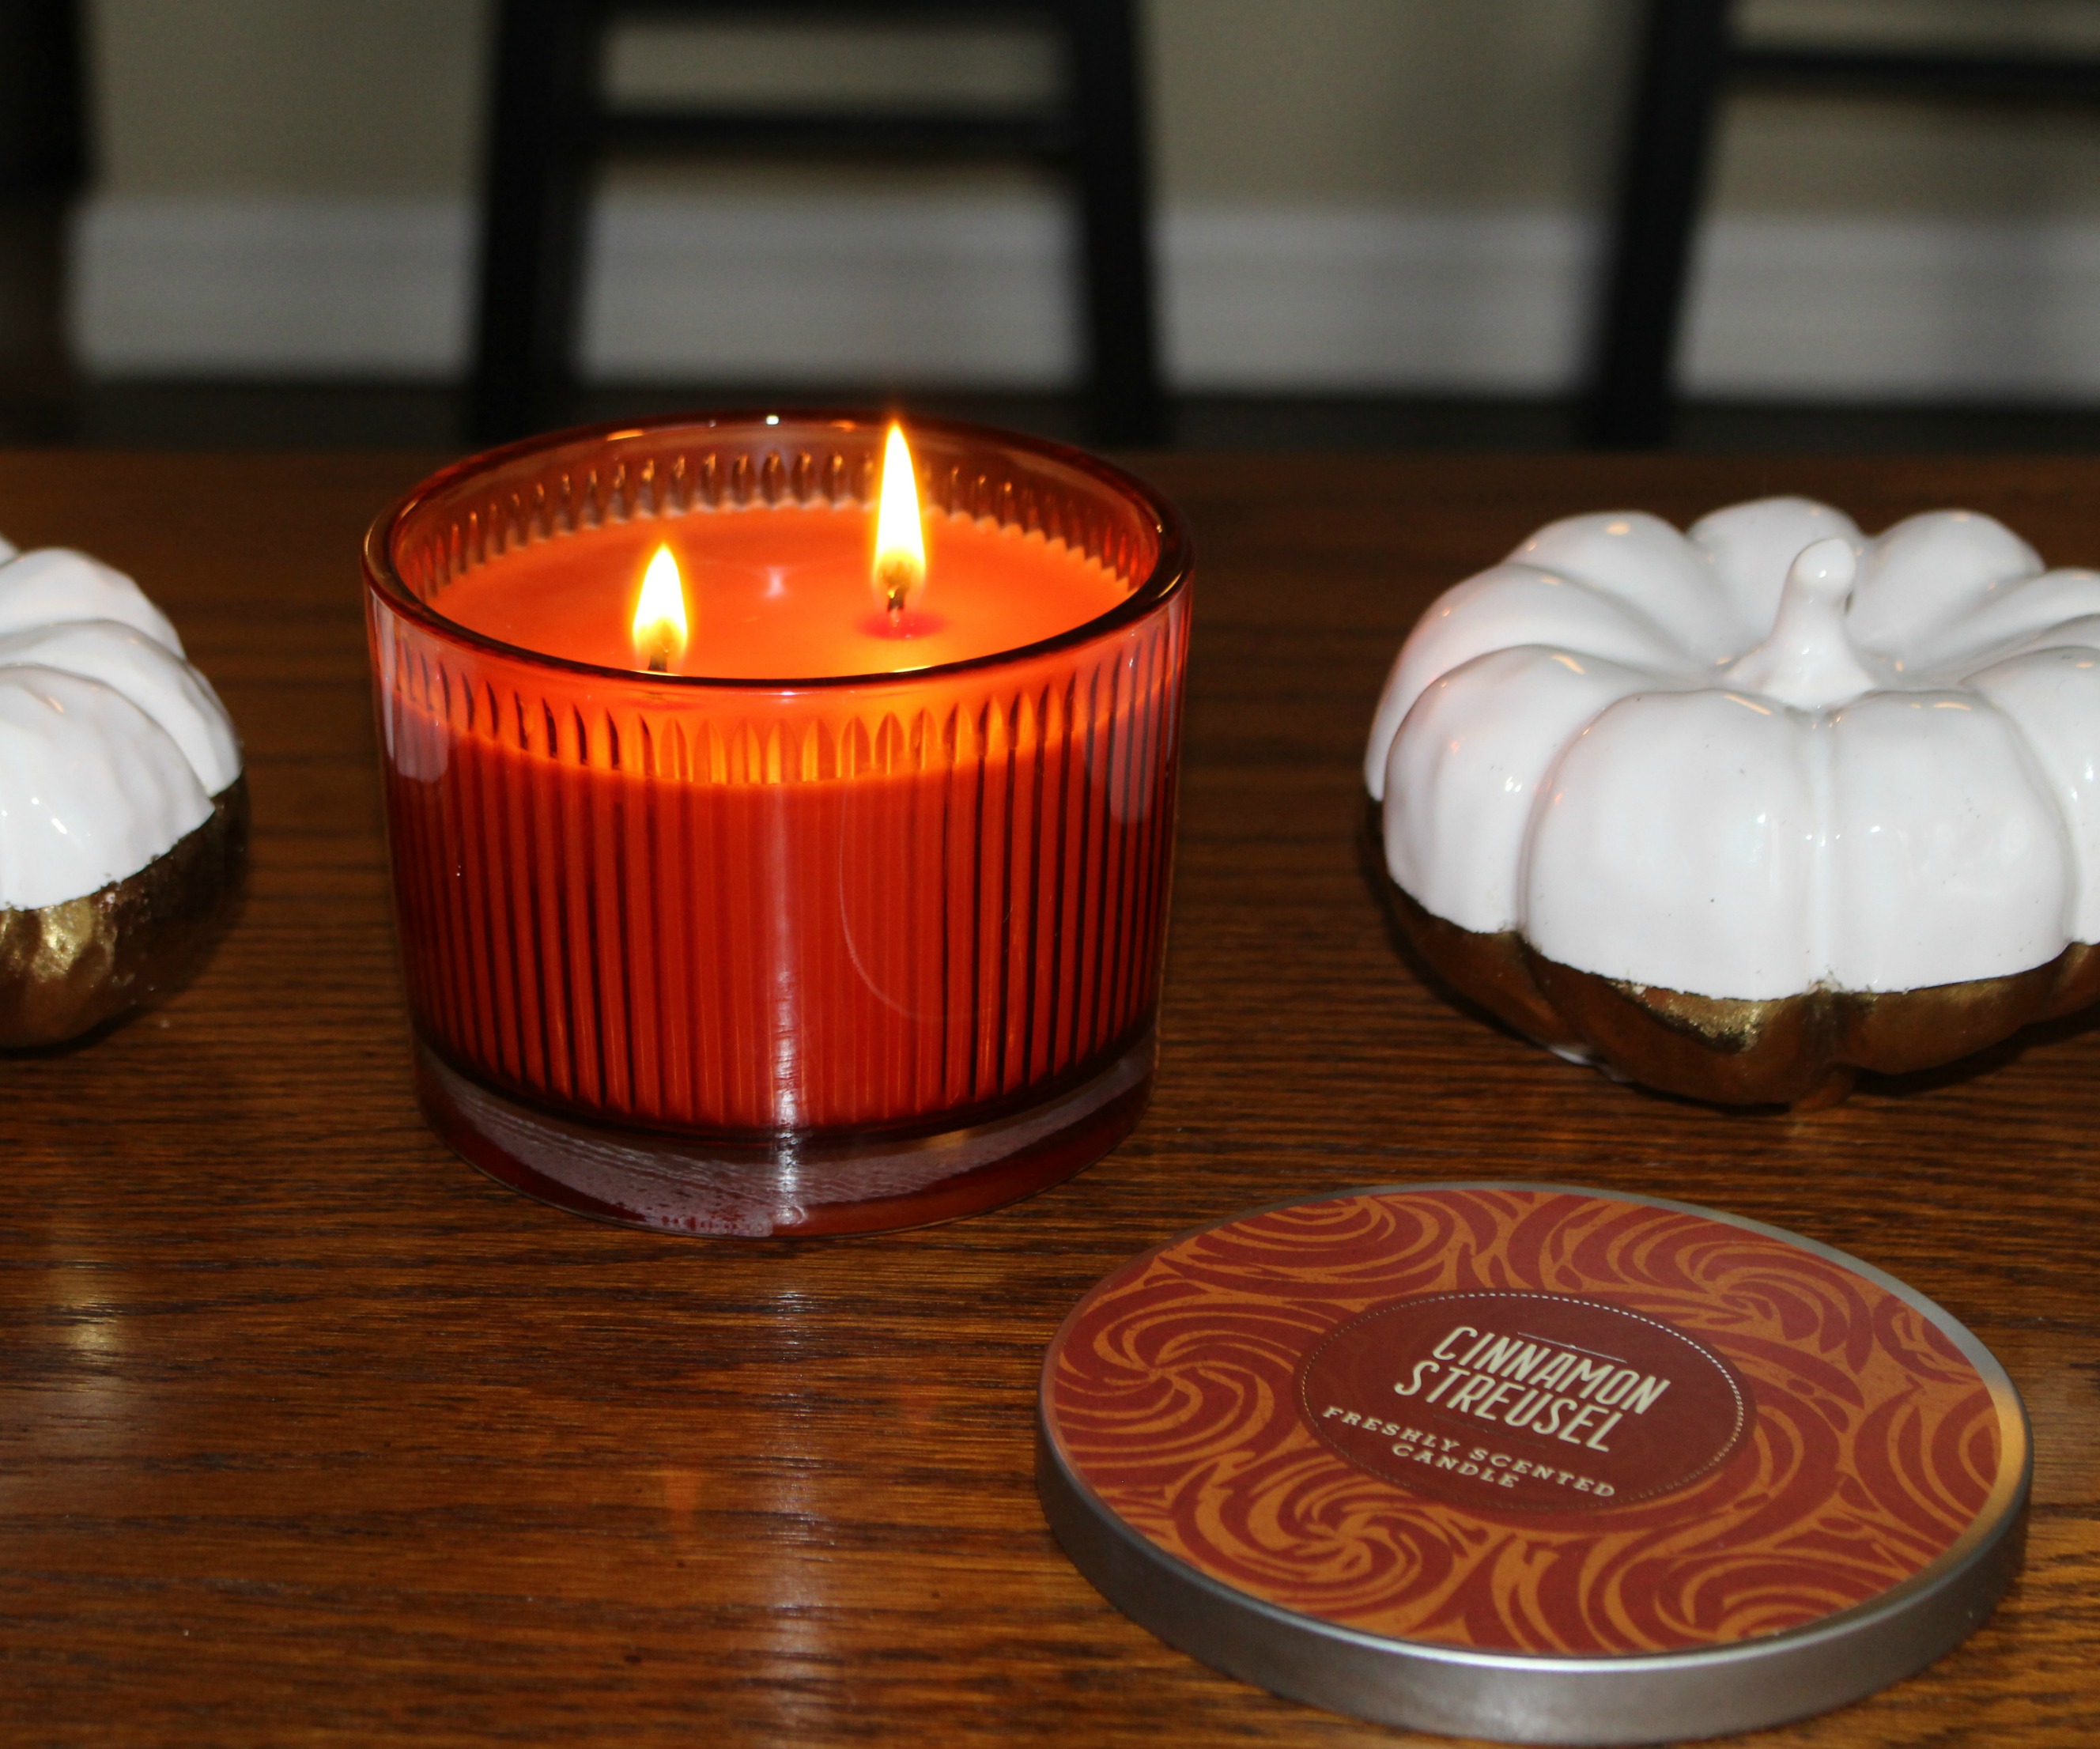 Tips-for-fall-decorating-on-budget-candle